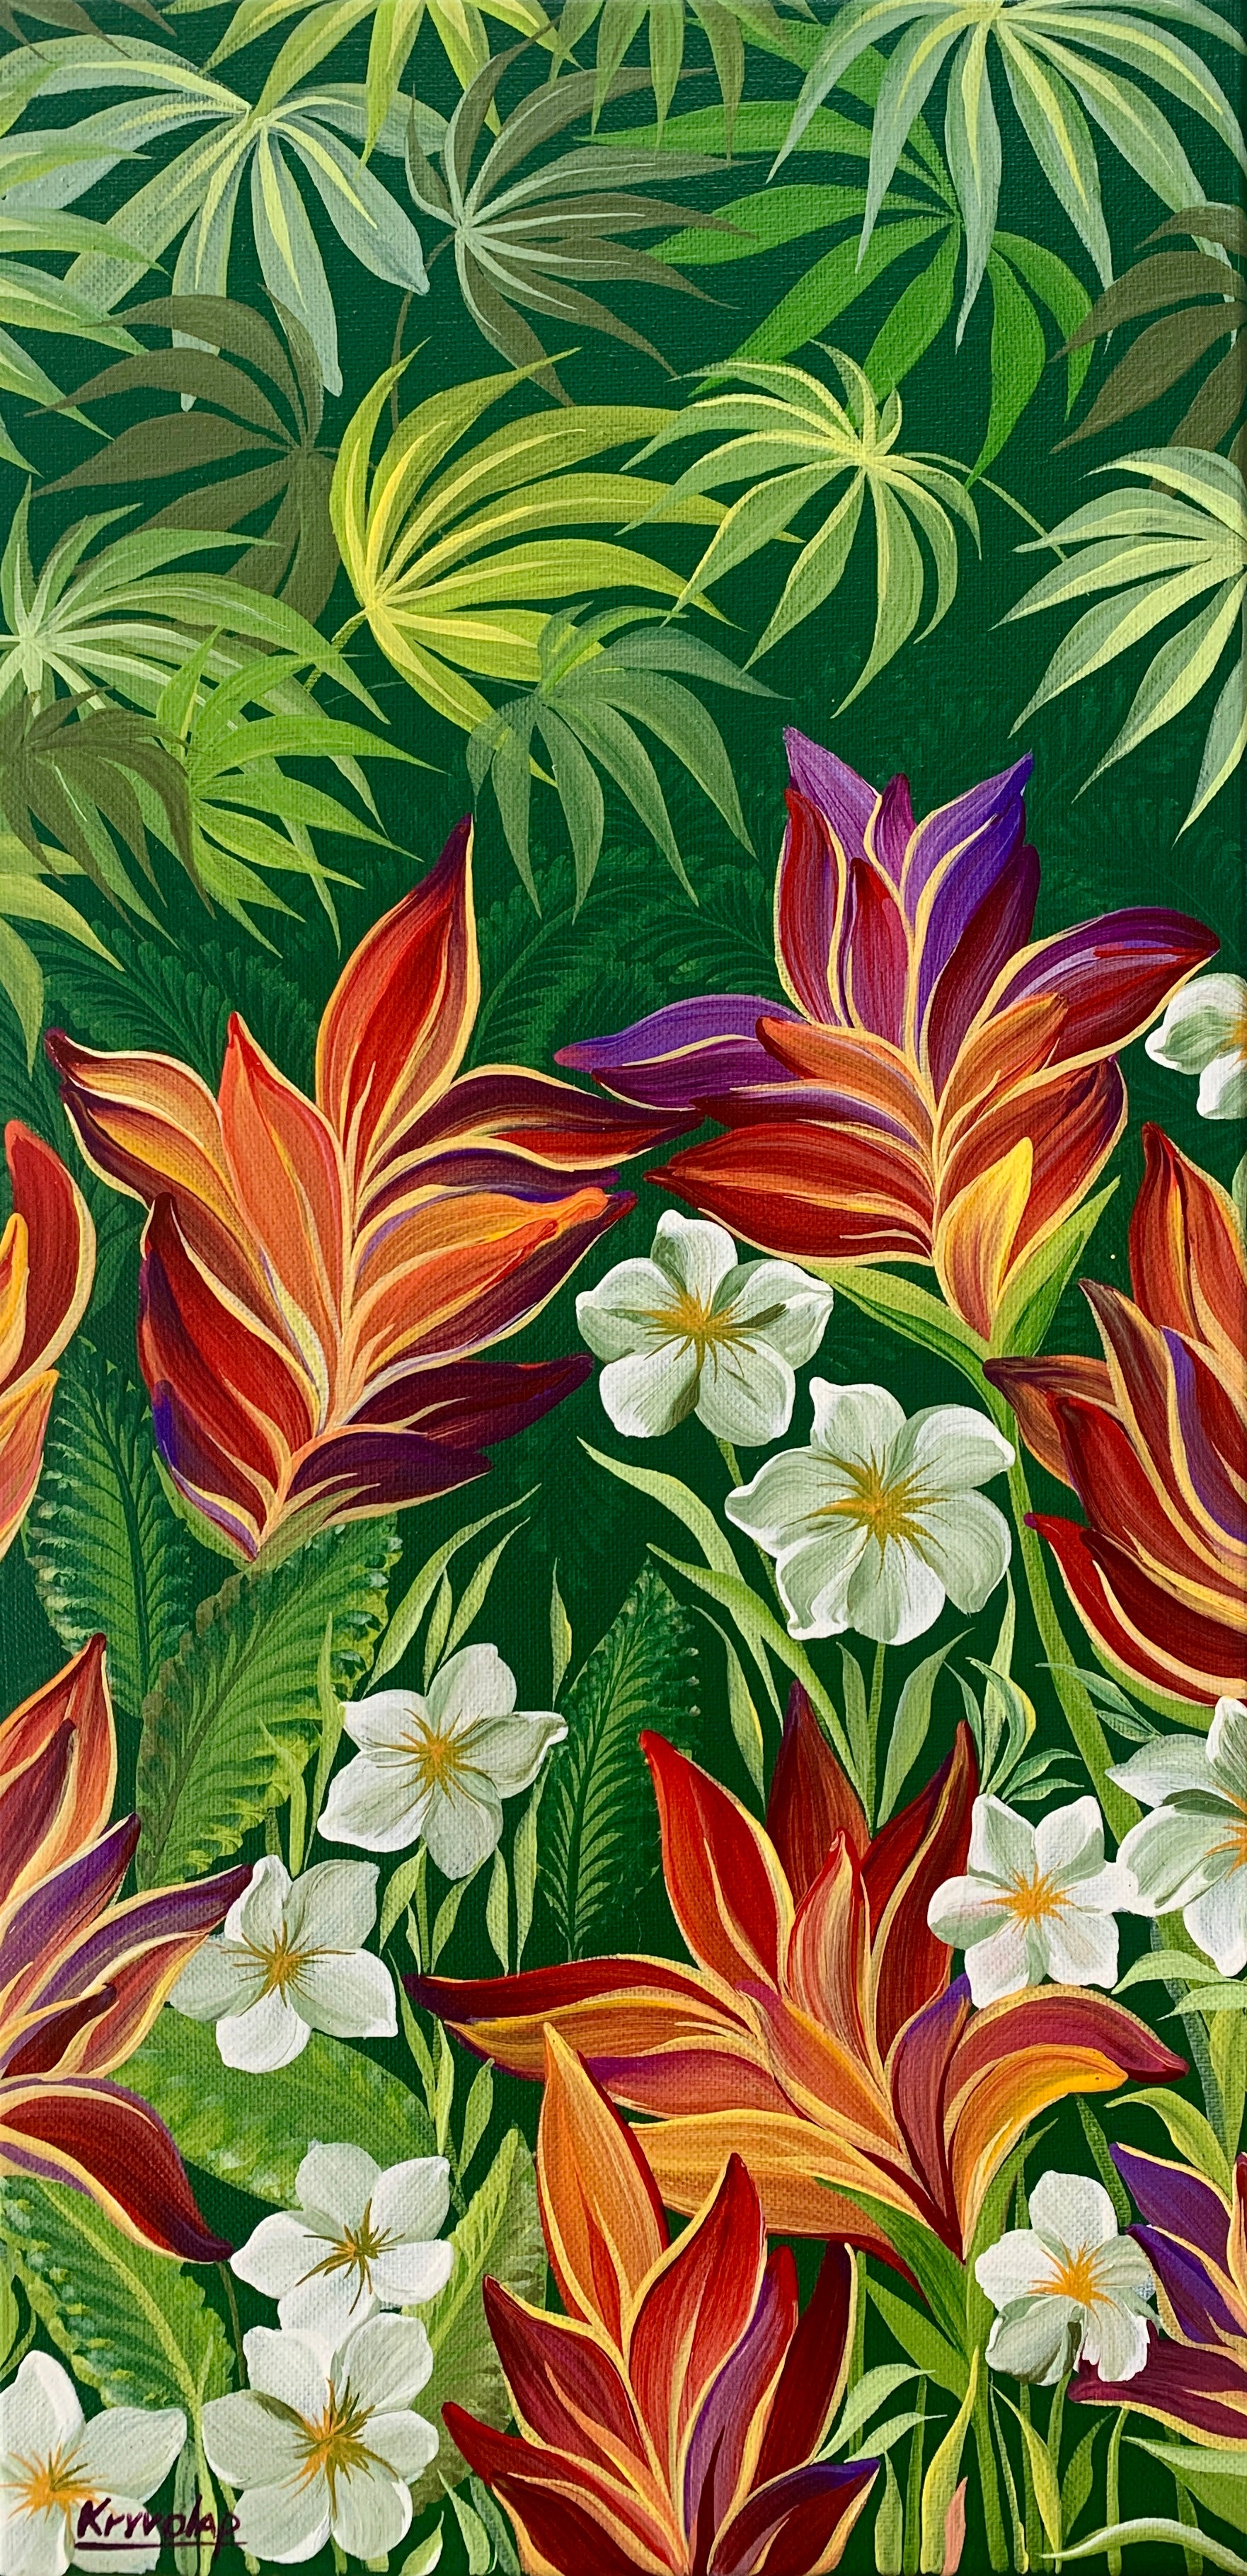 BLOOMING HELICONIA - 12 in x 24 in (30.5 cm x 70 cm)